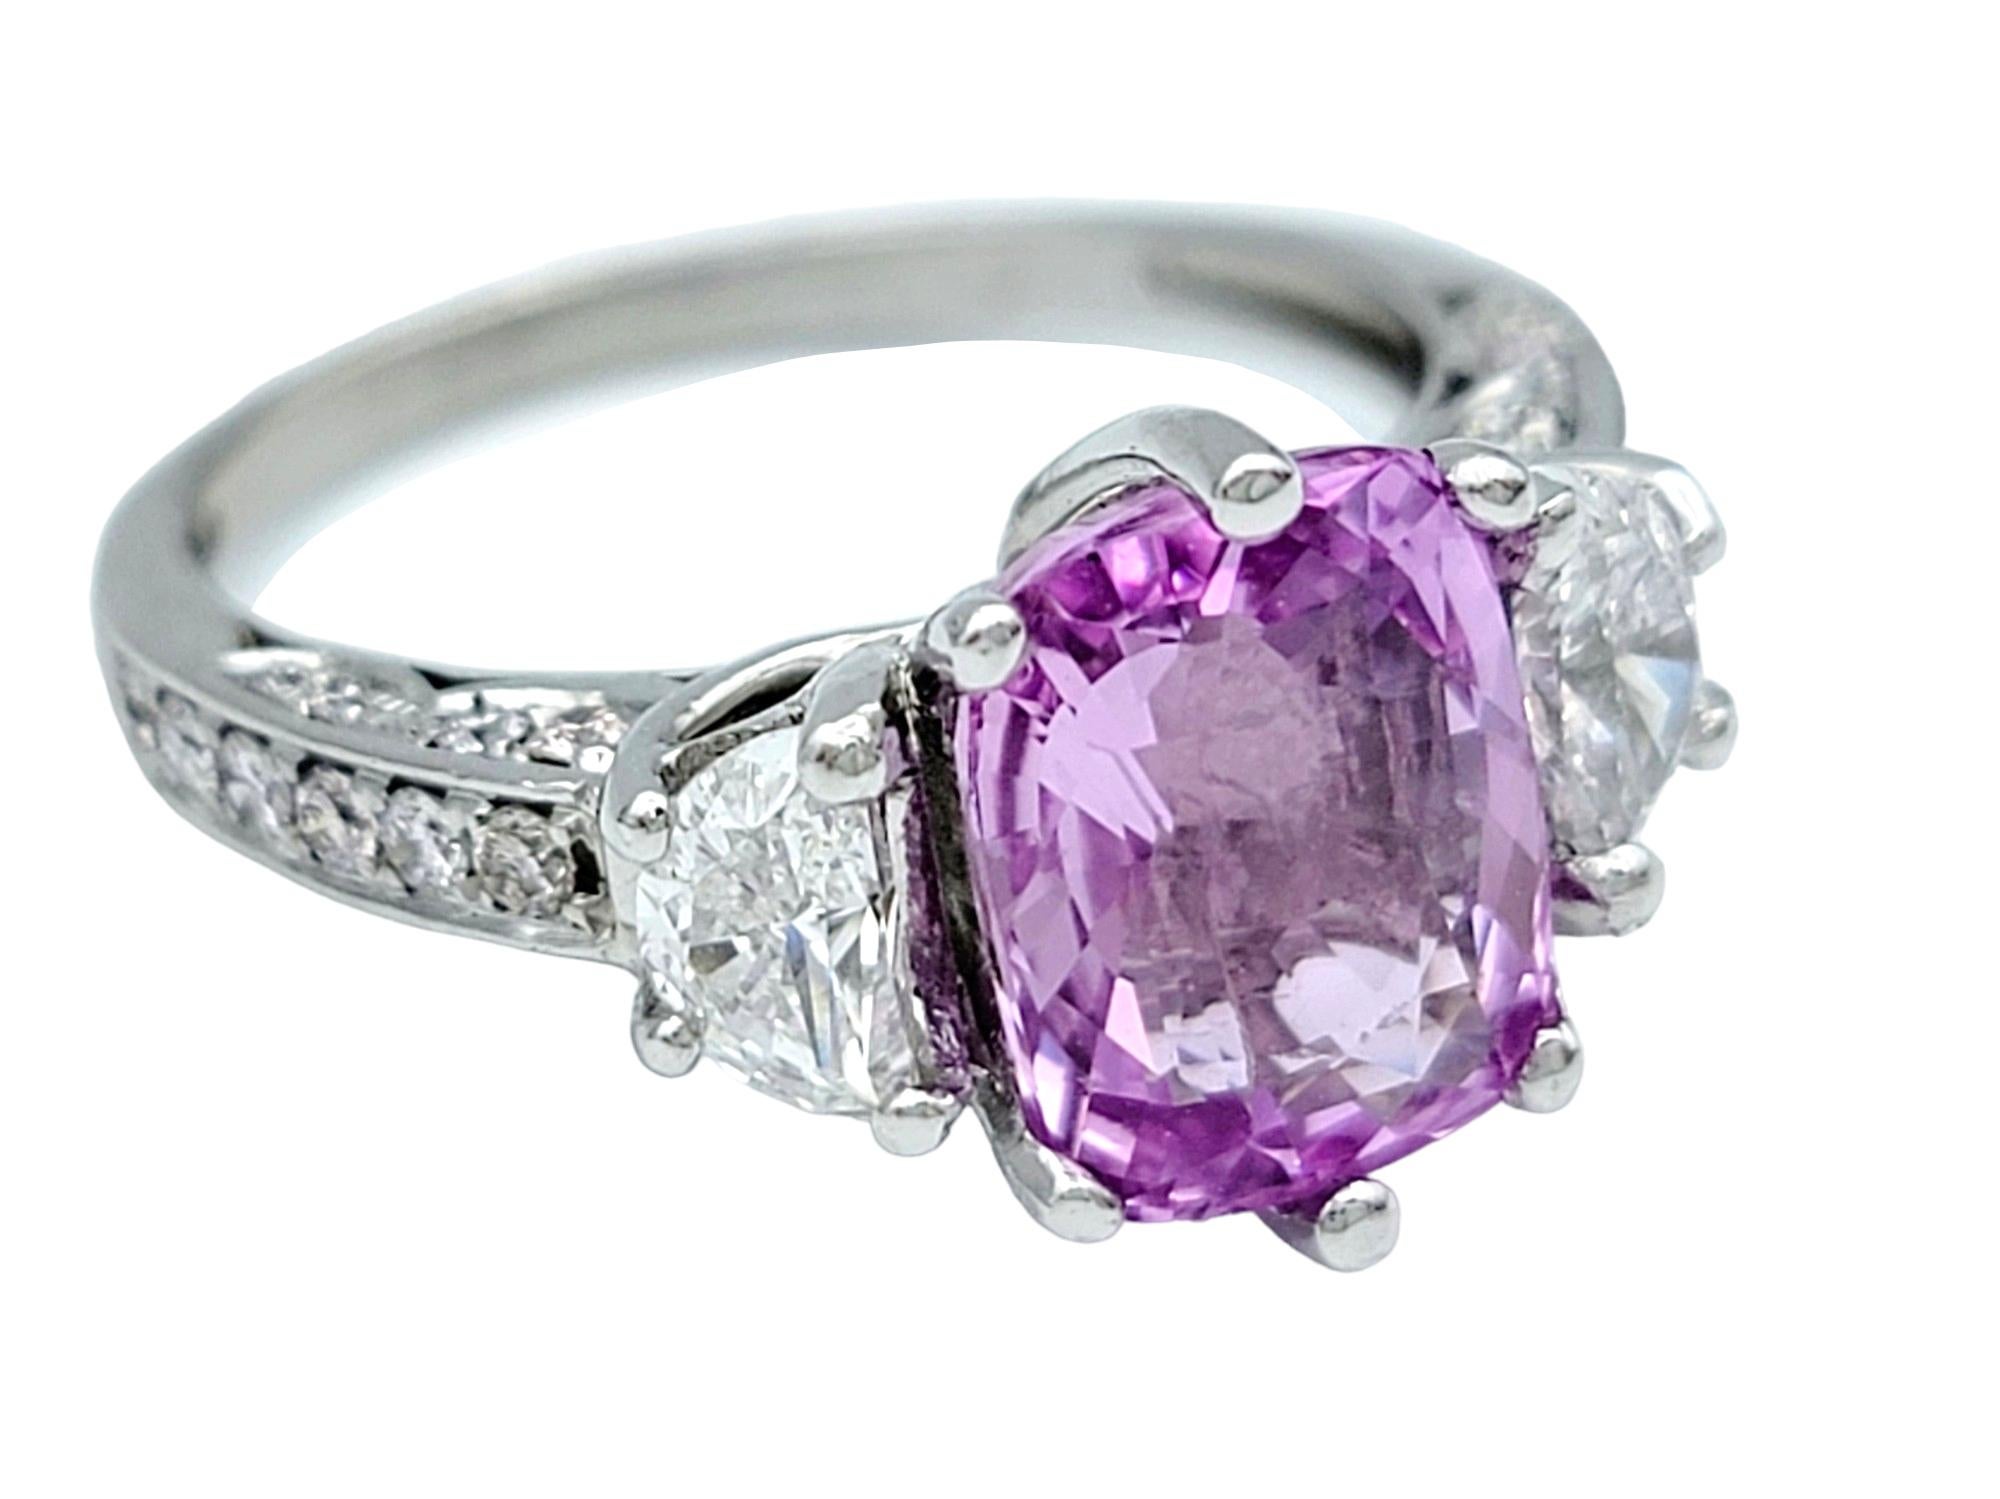 Cushion Pink Sapphire and Half Moon Diamond Three-Stone Ring Set in Platinum In Good Condition For Sale In Scottsdale, AZ